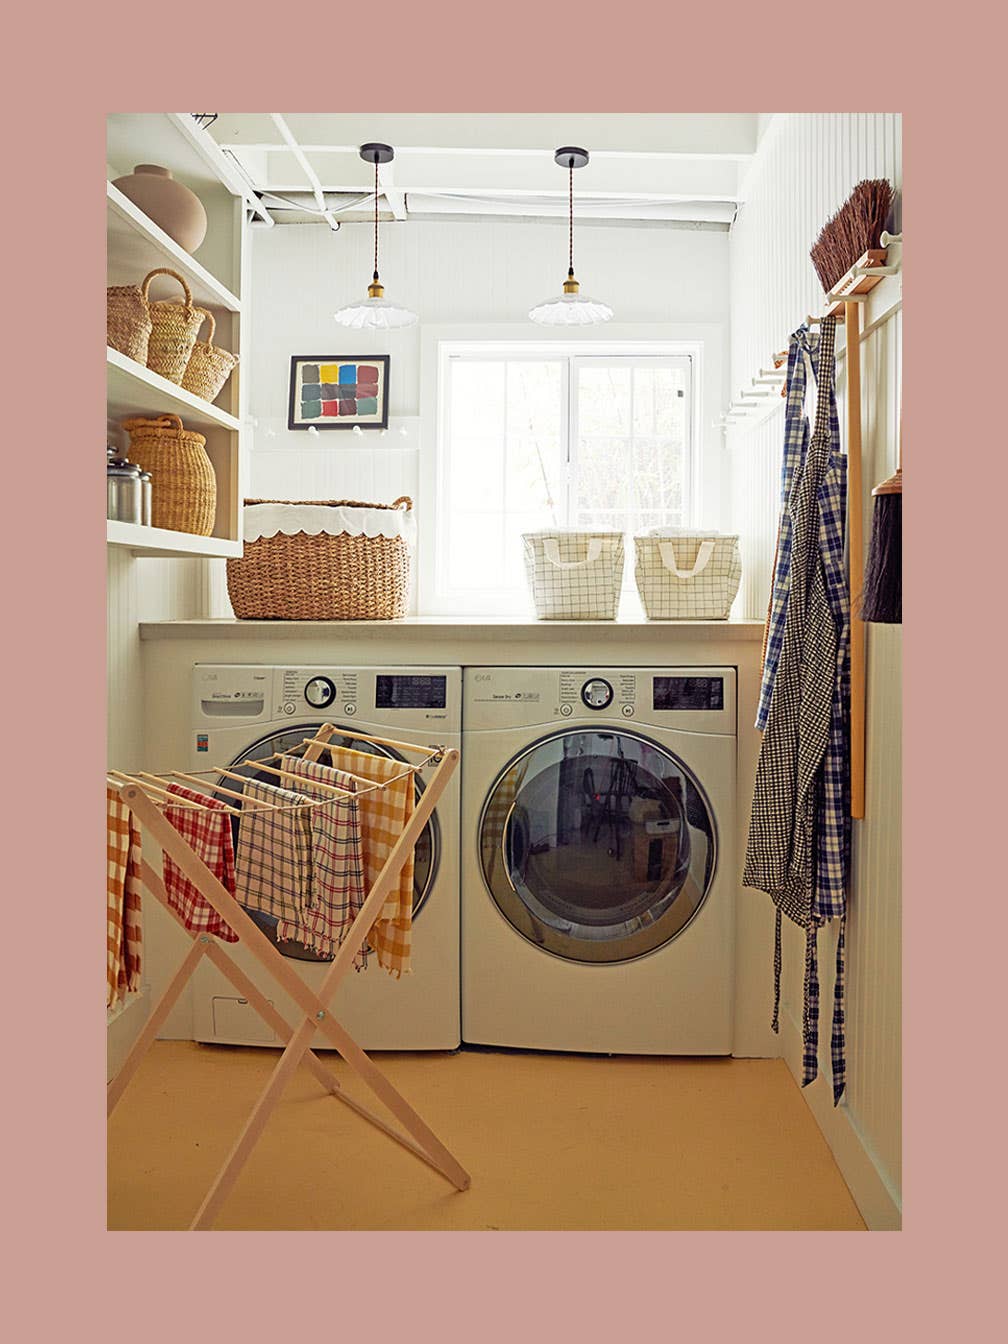 Decorative Details Make All the Difference in This Laundry Room Reno